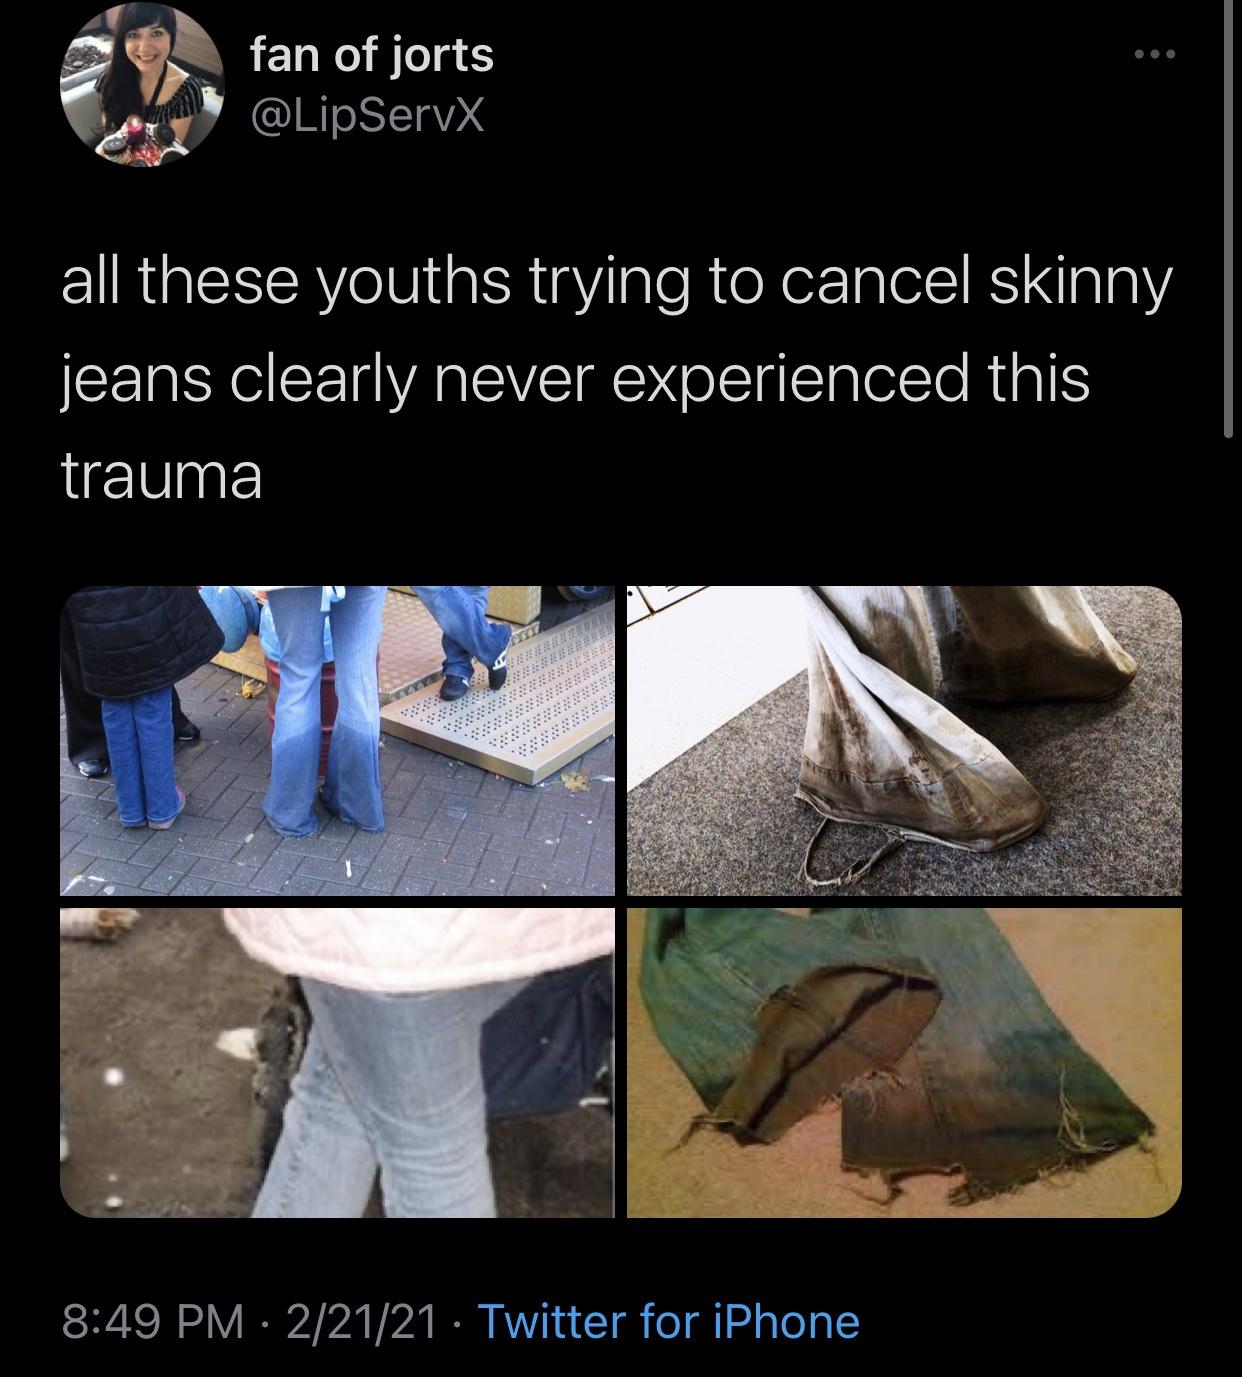 material - fan of jorts all these youths trying to cancel skinny jeans clearly never experienced this trauma 22121 Twitter for iPhone